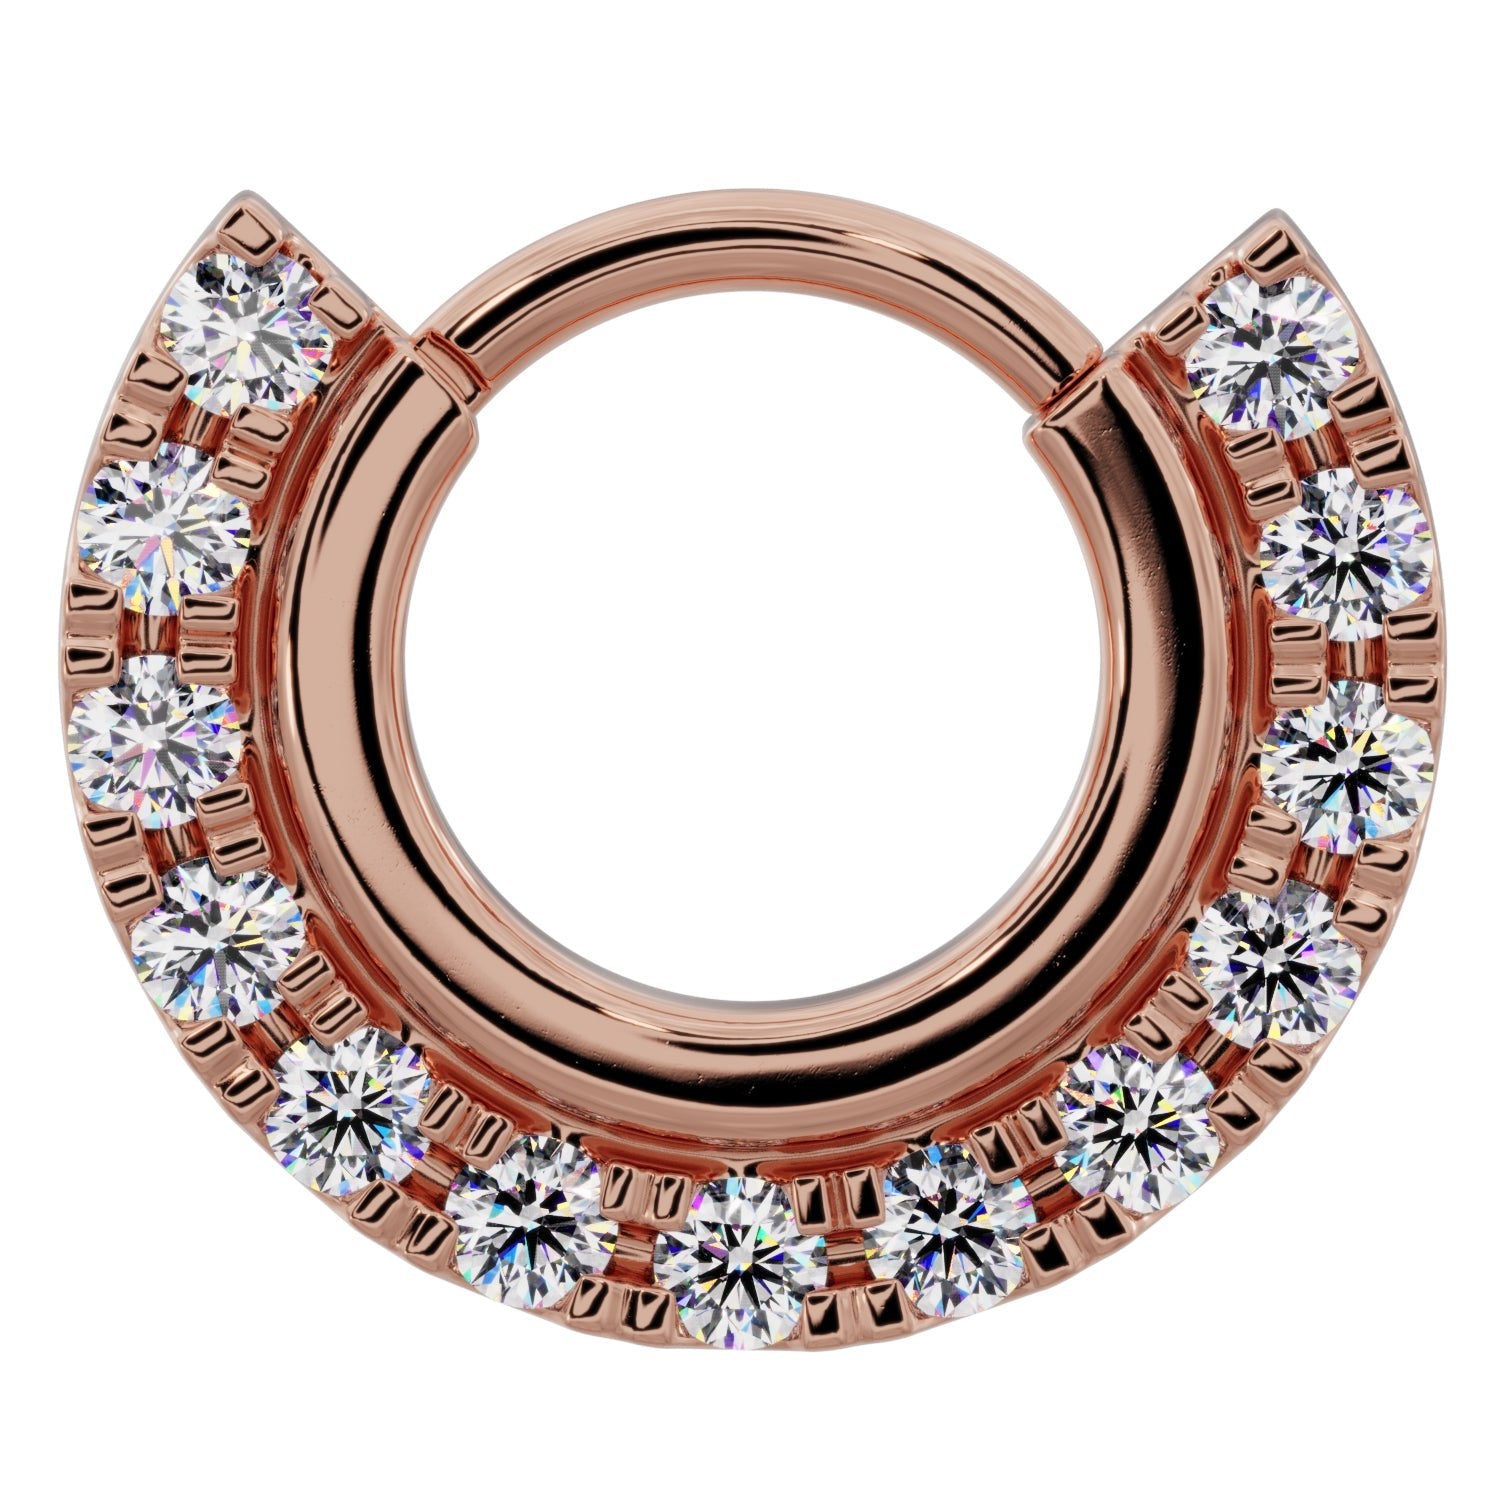 Gold Band and Diamonds Clicker 14k Gold Clicker Ring Hoop-14K Rose Gold   16G (1.2mm)   3 8